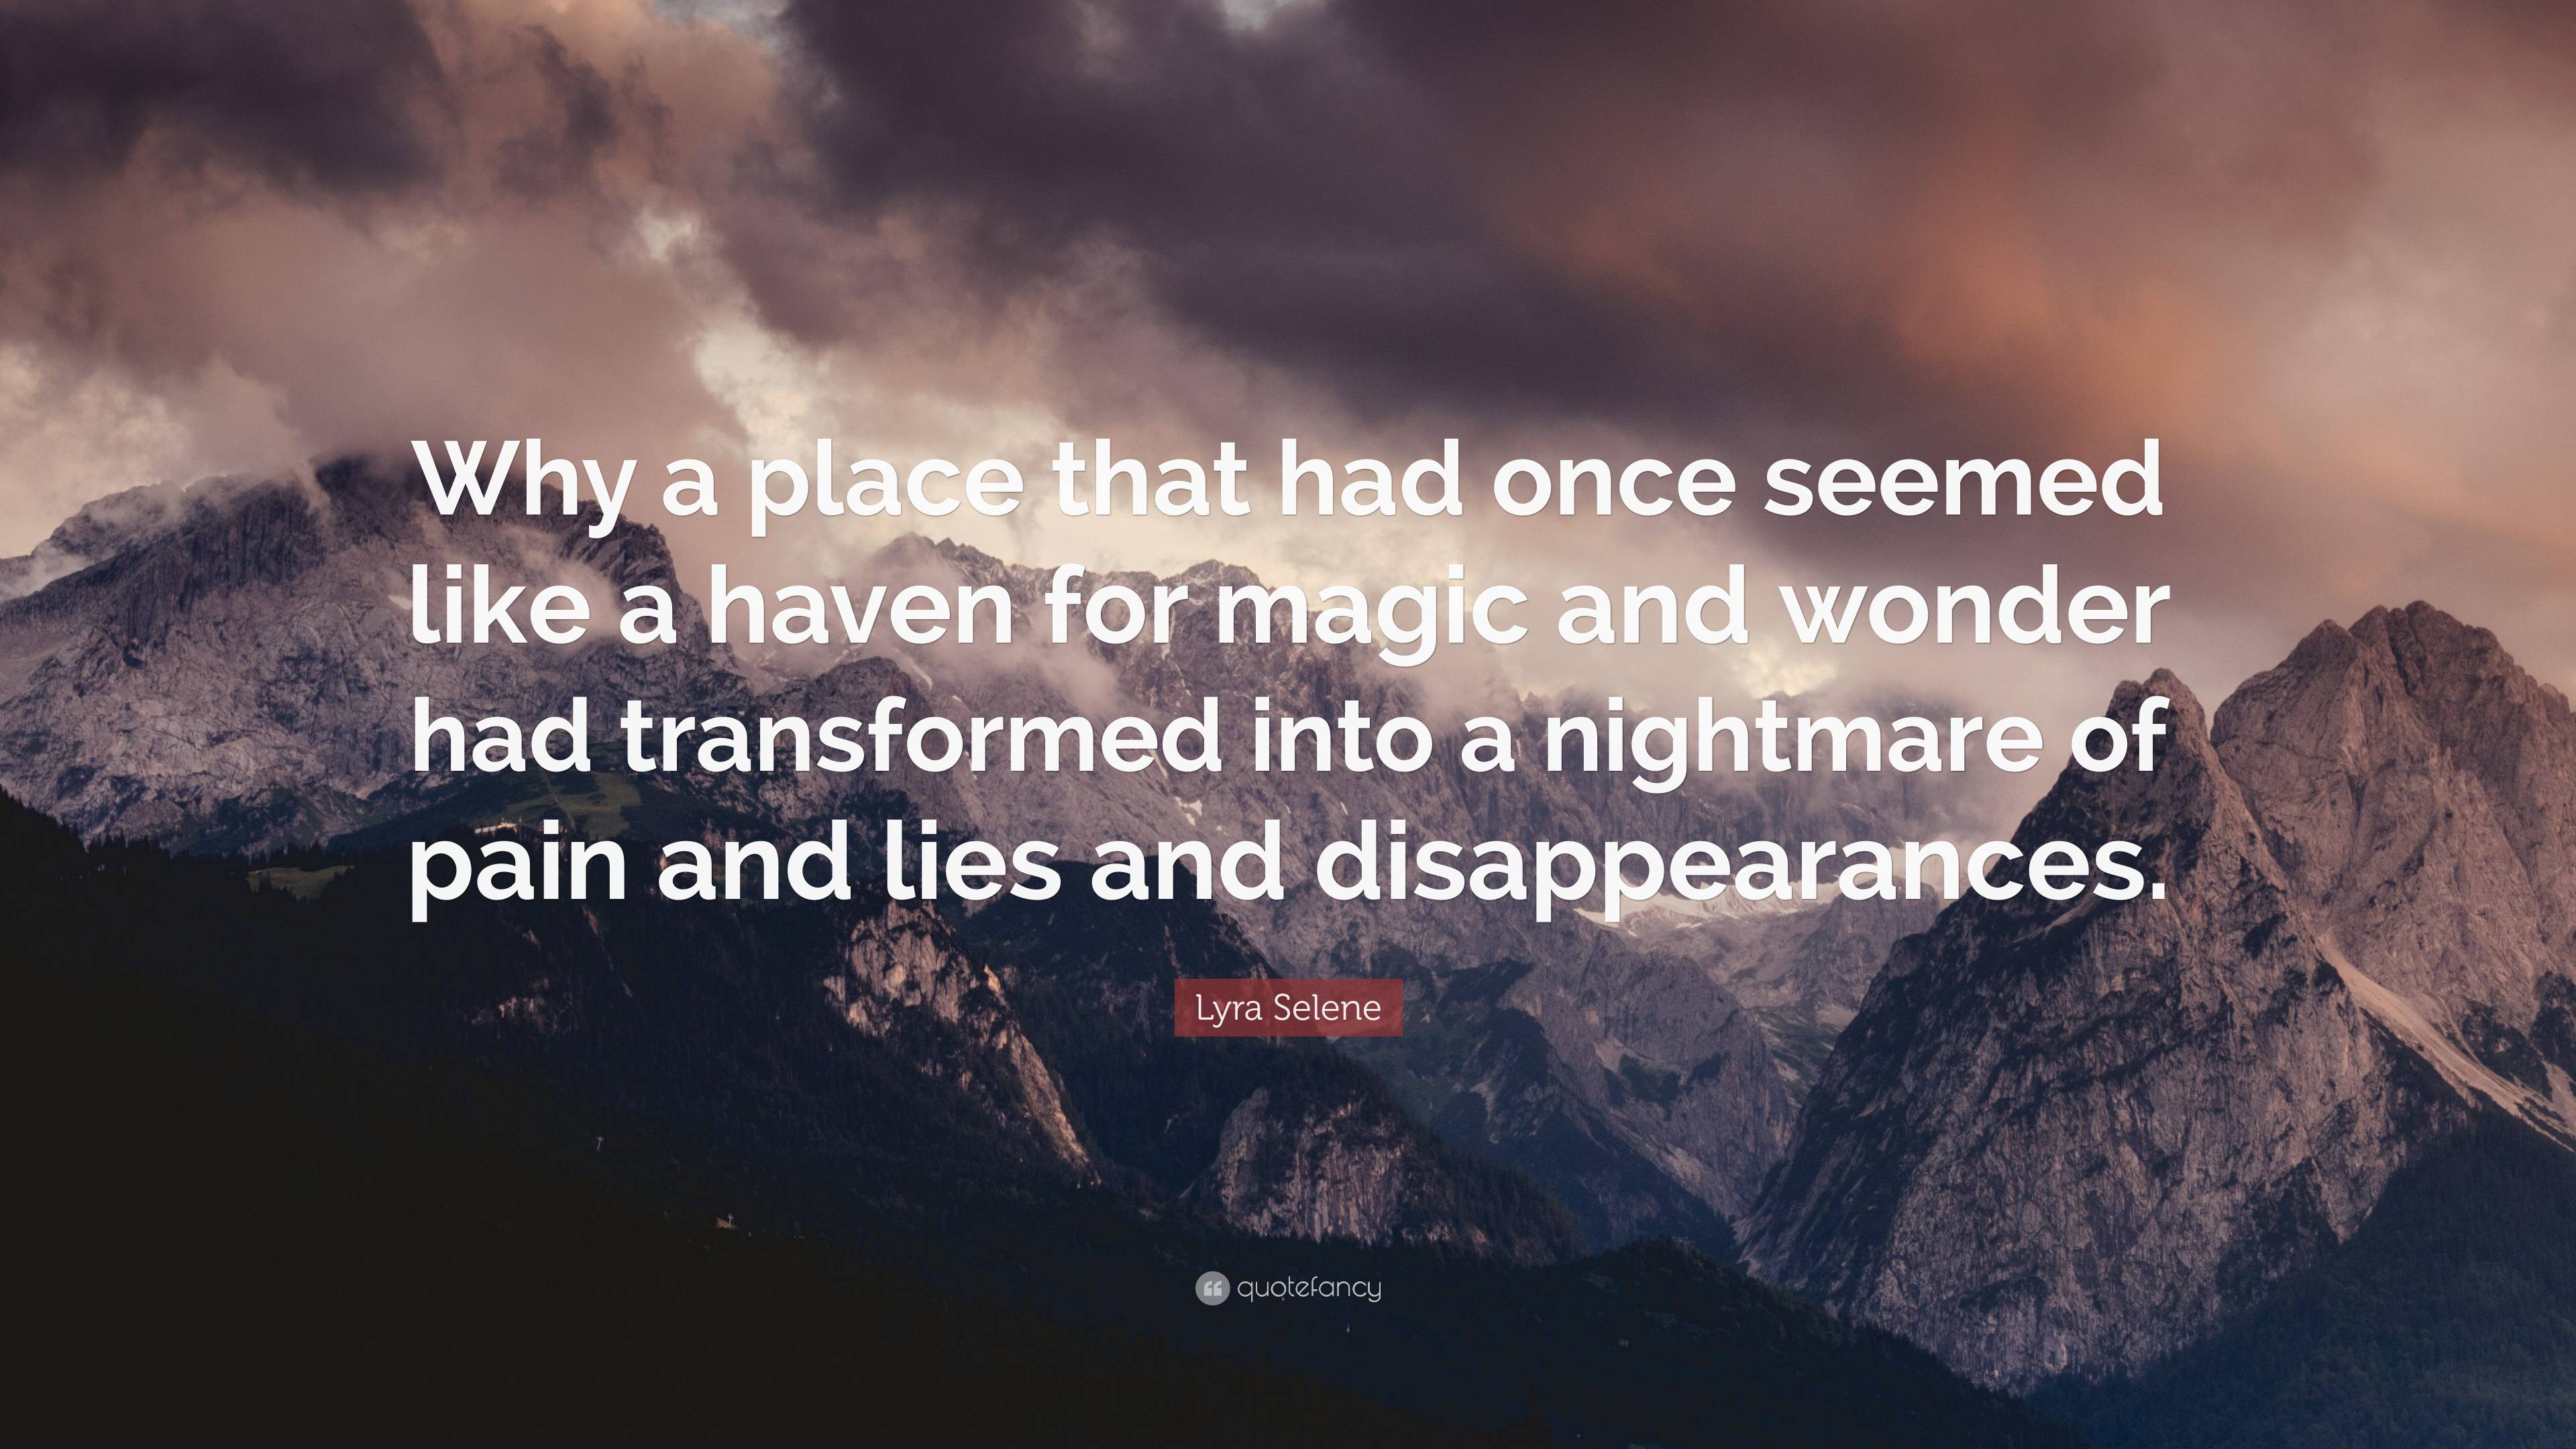 Lyra Selene Quote: “Why a place that had once seemed like a haven for ...